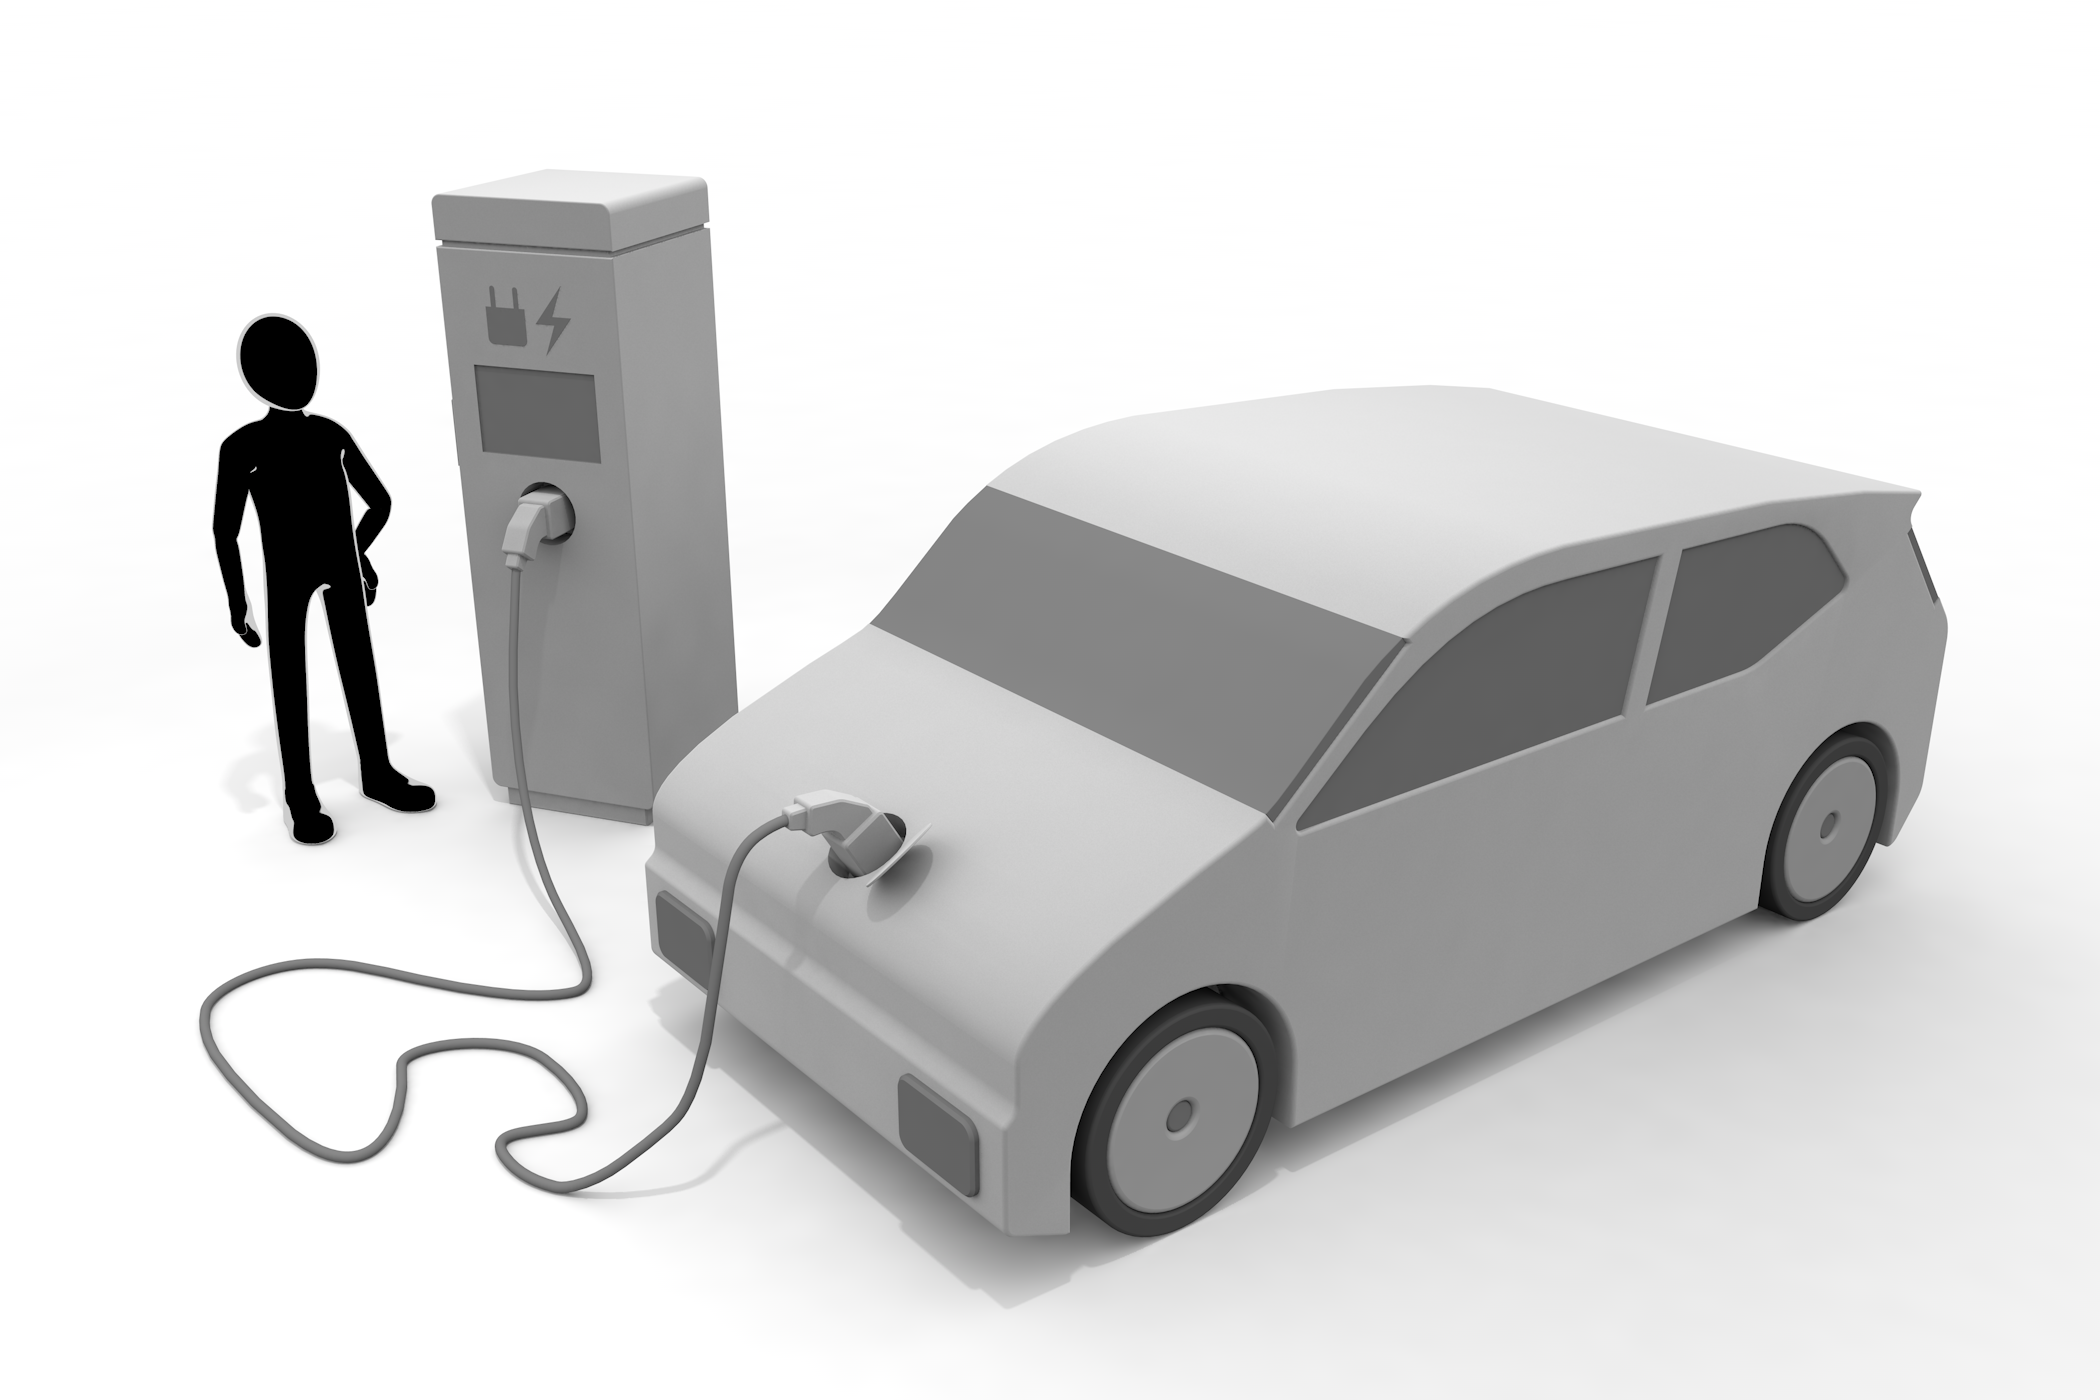 Basic information on electric vehicles / Equipped with engine / Charging spot search --Illustration / 3D rendering / Free material / Commercial use OK